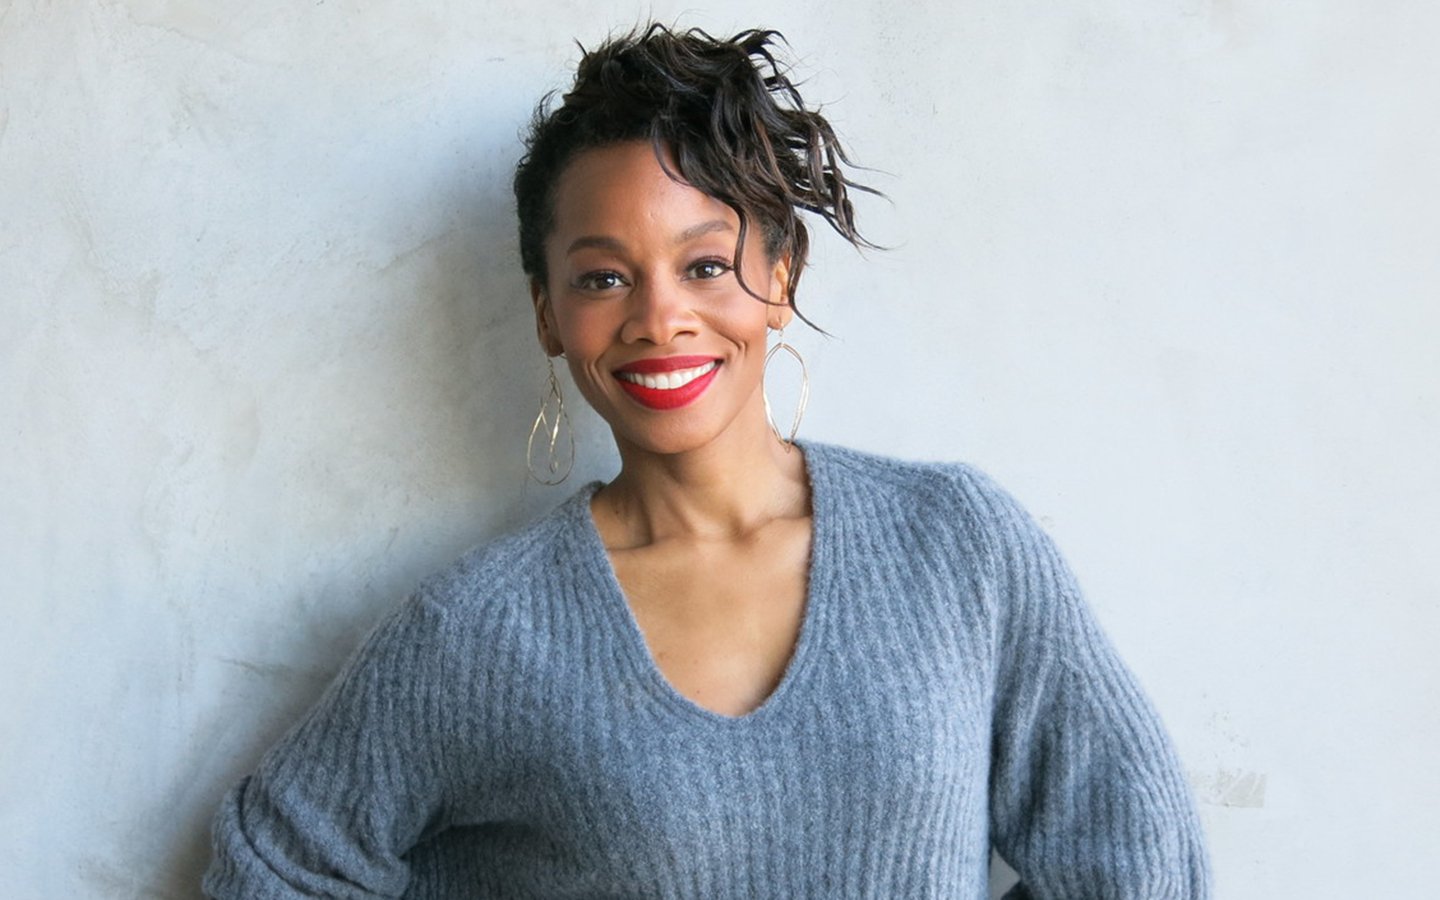 Anika Noni Rose Joins Cast of ‘Assassination Nation’